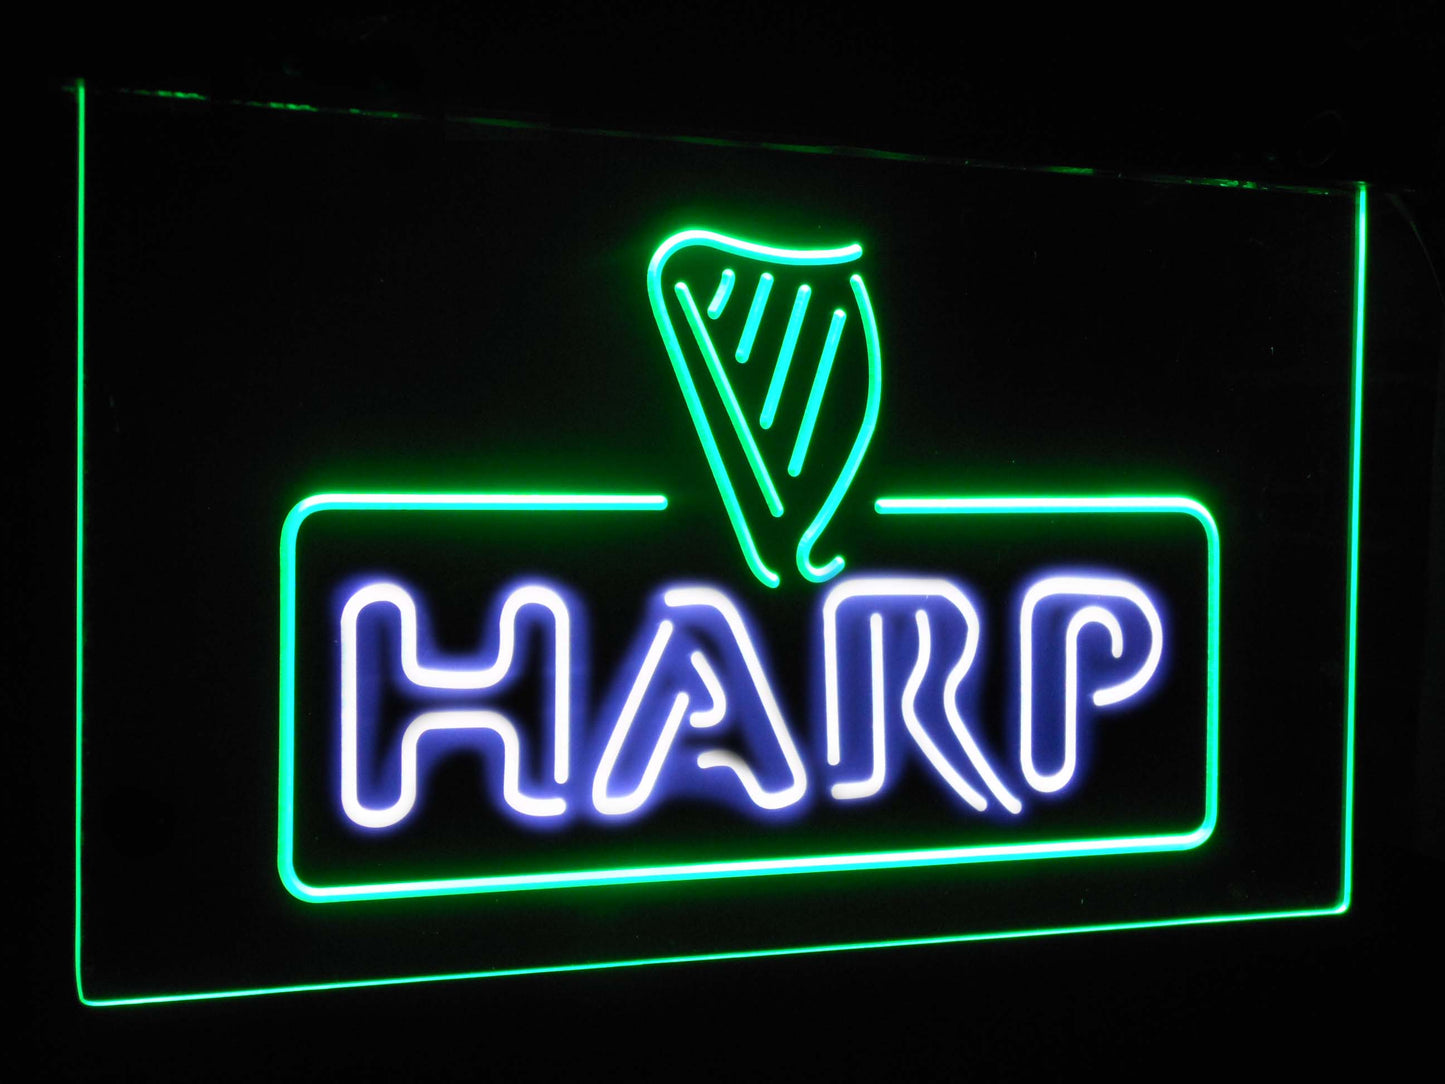 Harp  Bar Decoration Gift Dual Color Led Neon Light Signs st6-a2001 by Woody Signs Co. - Handmade Crafted Unique Wooden Creative